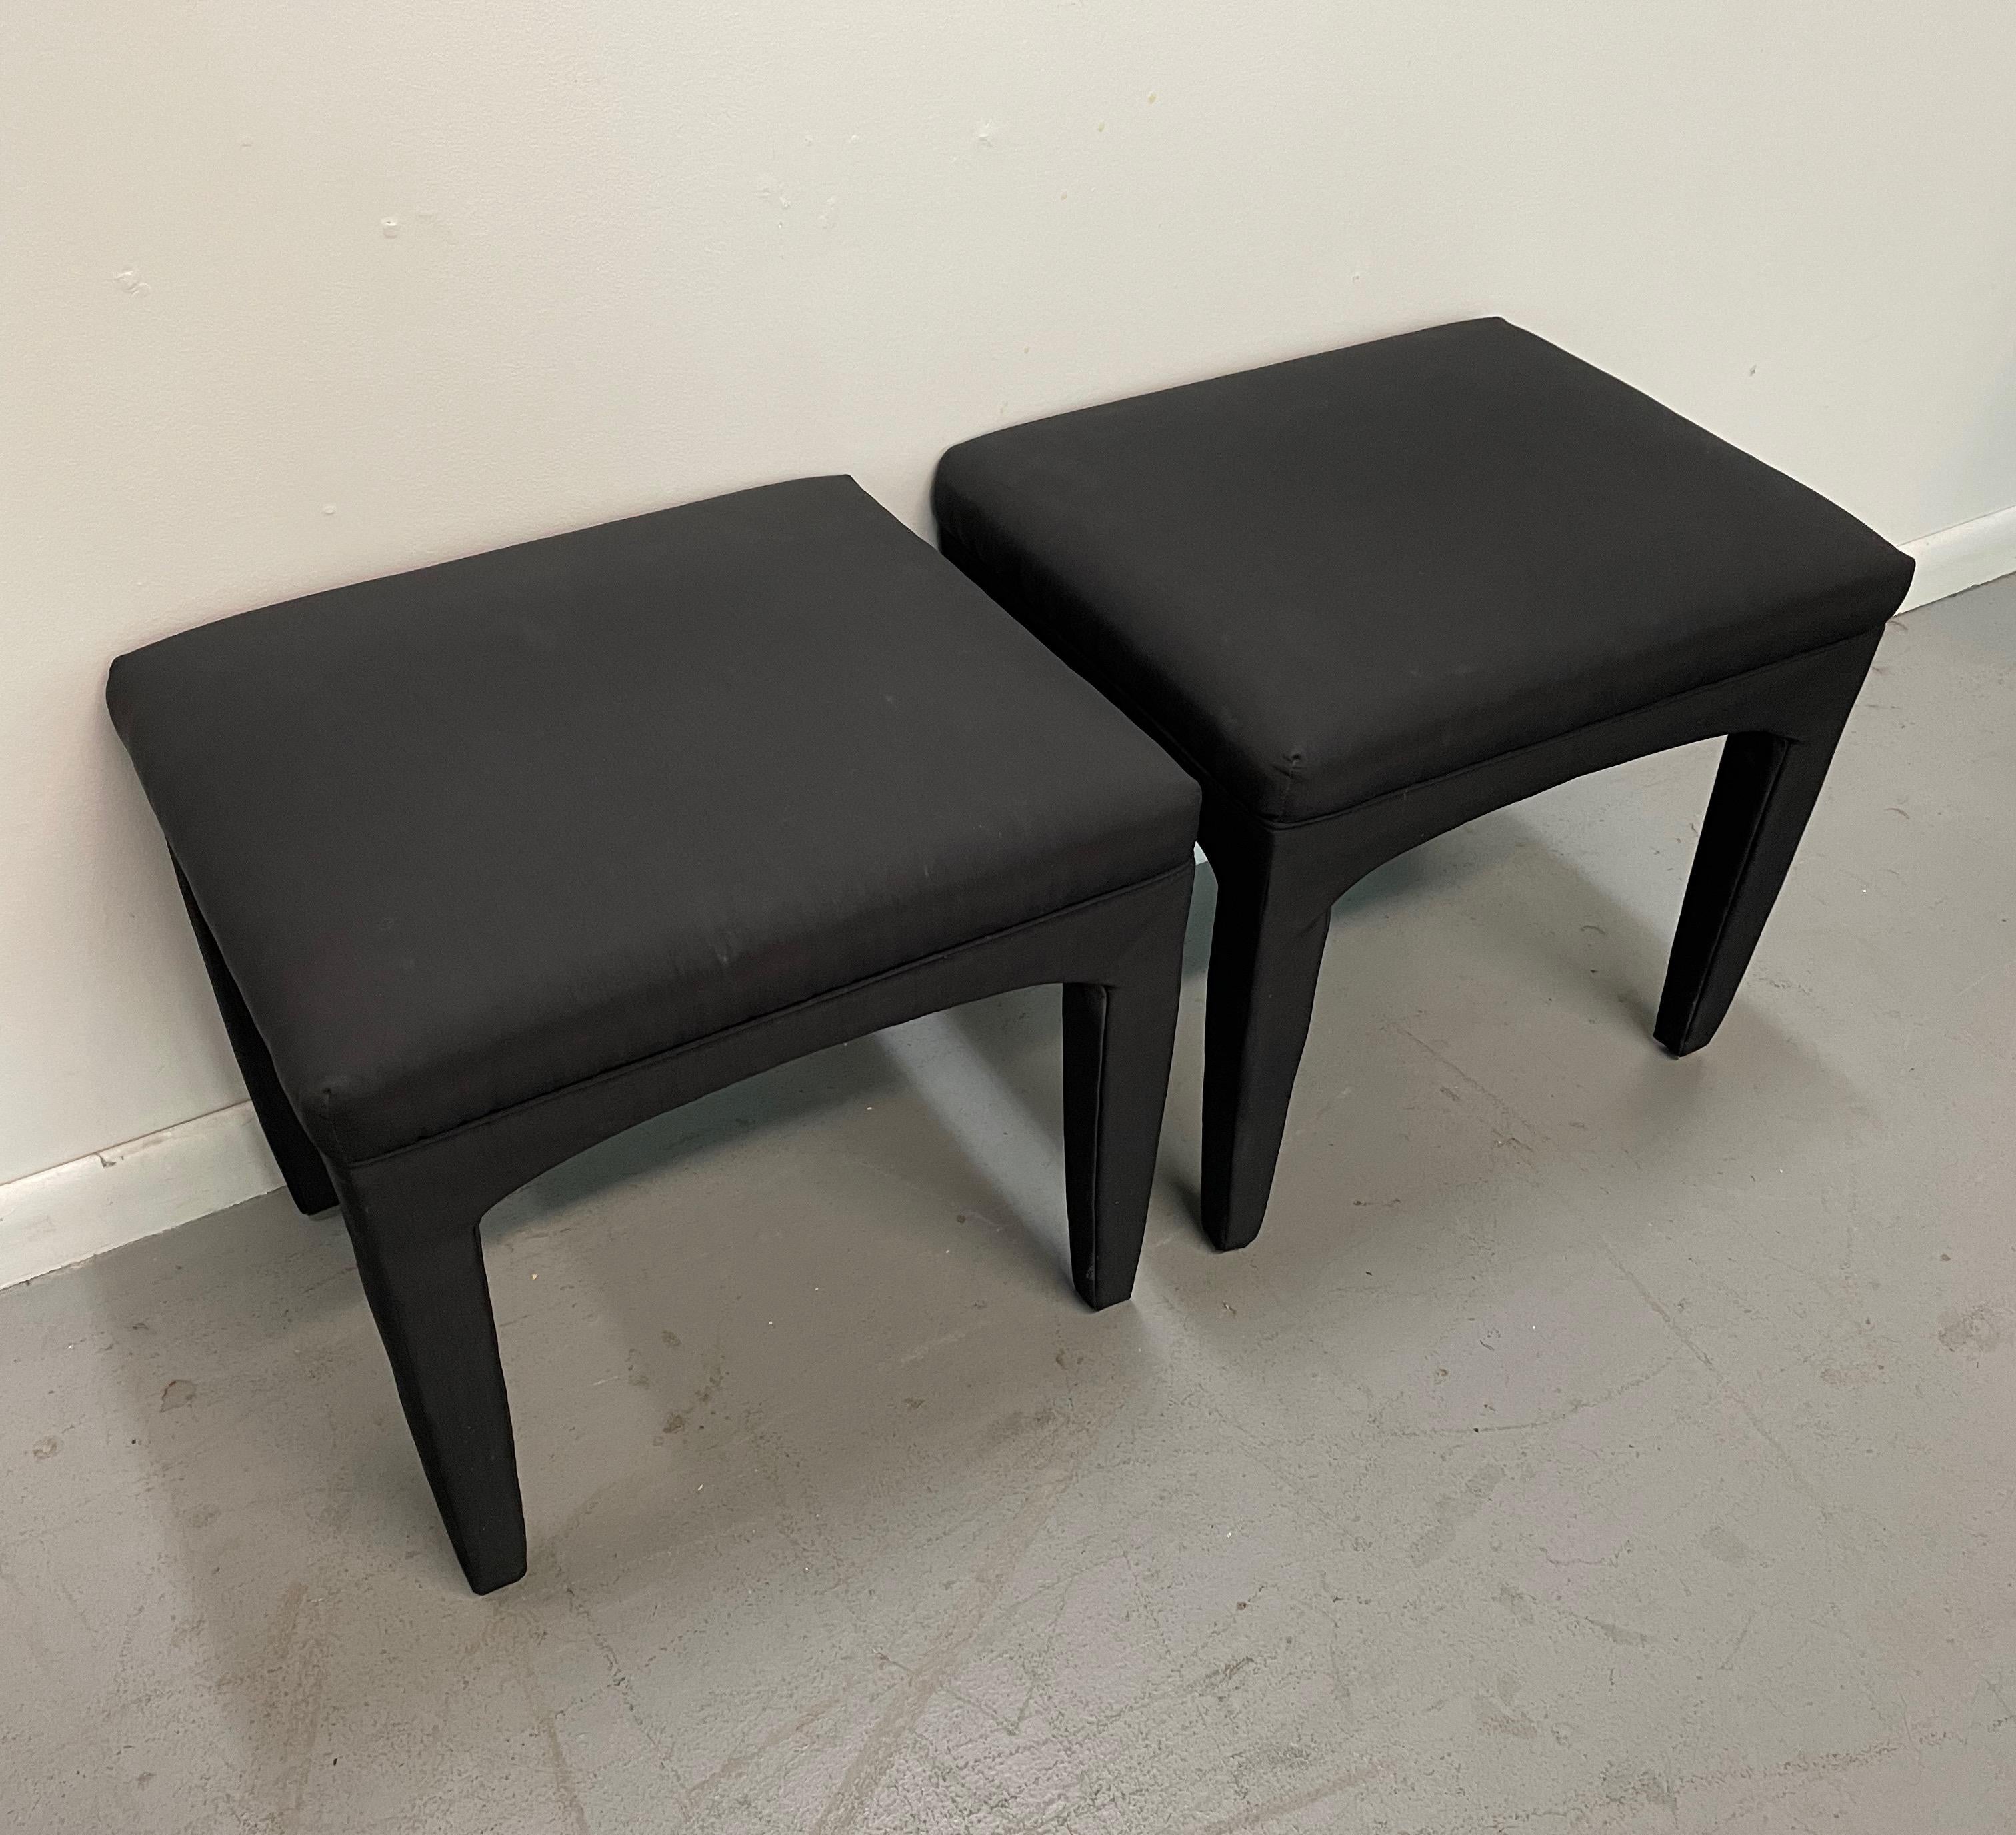 This pair of designer stools is upholstered in silky black fabric, they have a subtle arch to them that gives a graceful profile. These stools will ad style to any room.